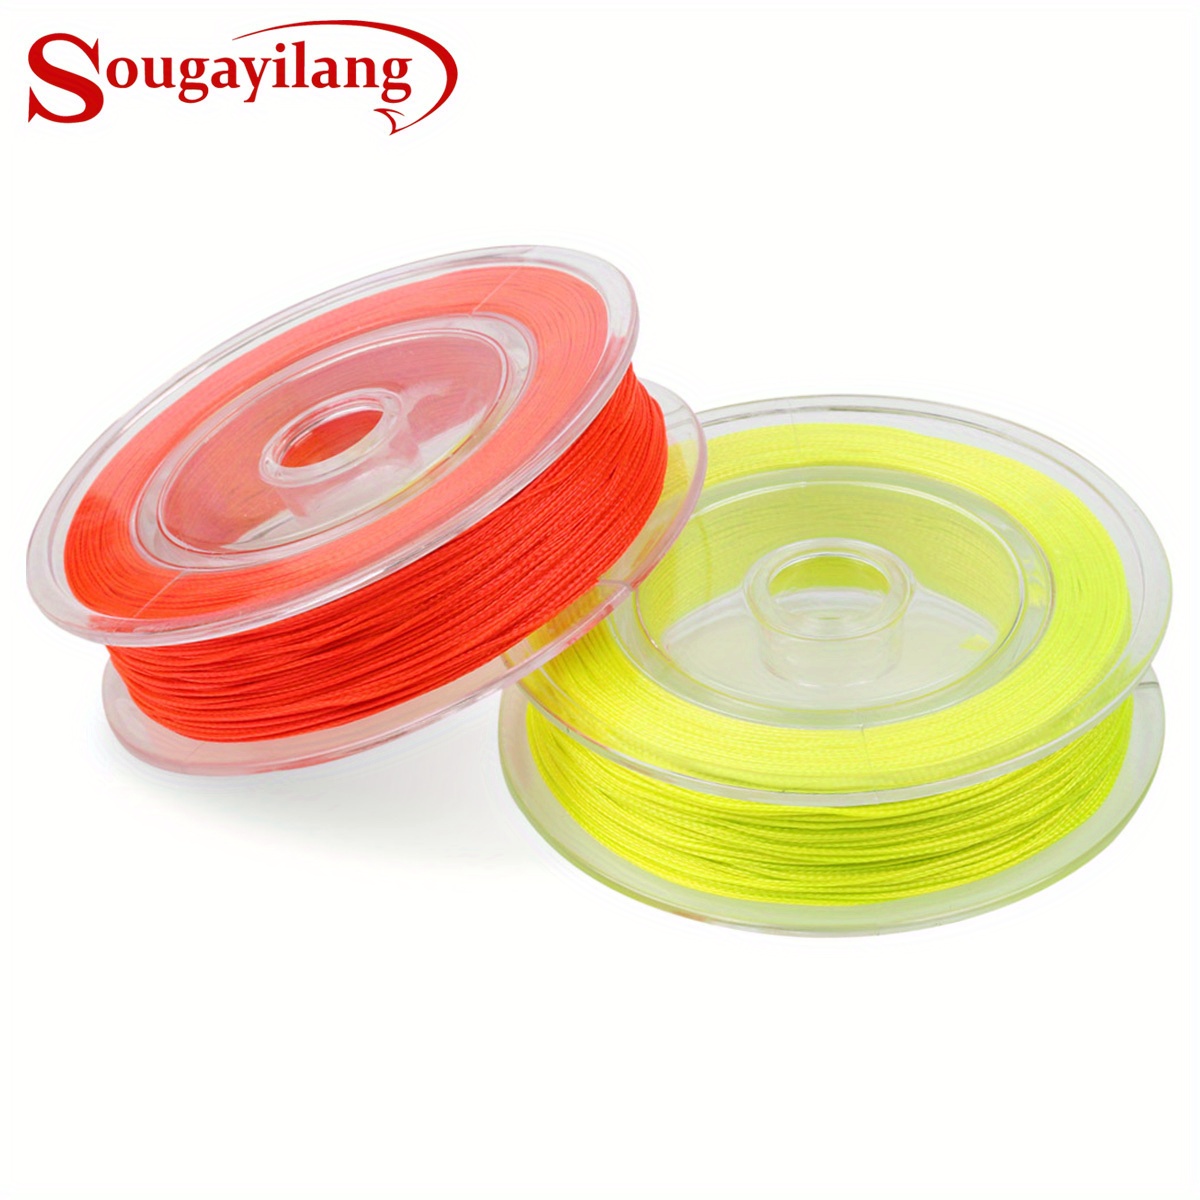 6pcs Fly Fishing Tippet Holder Leading Rope Fishing Wire Loop